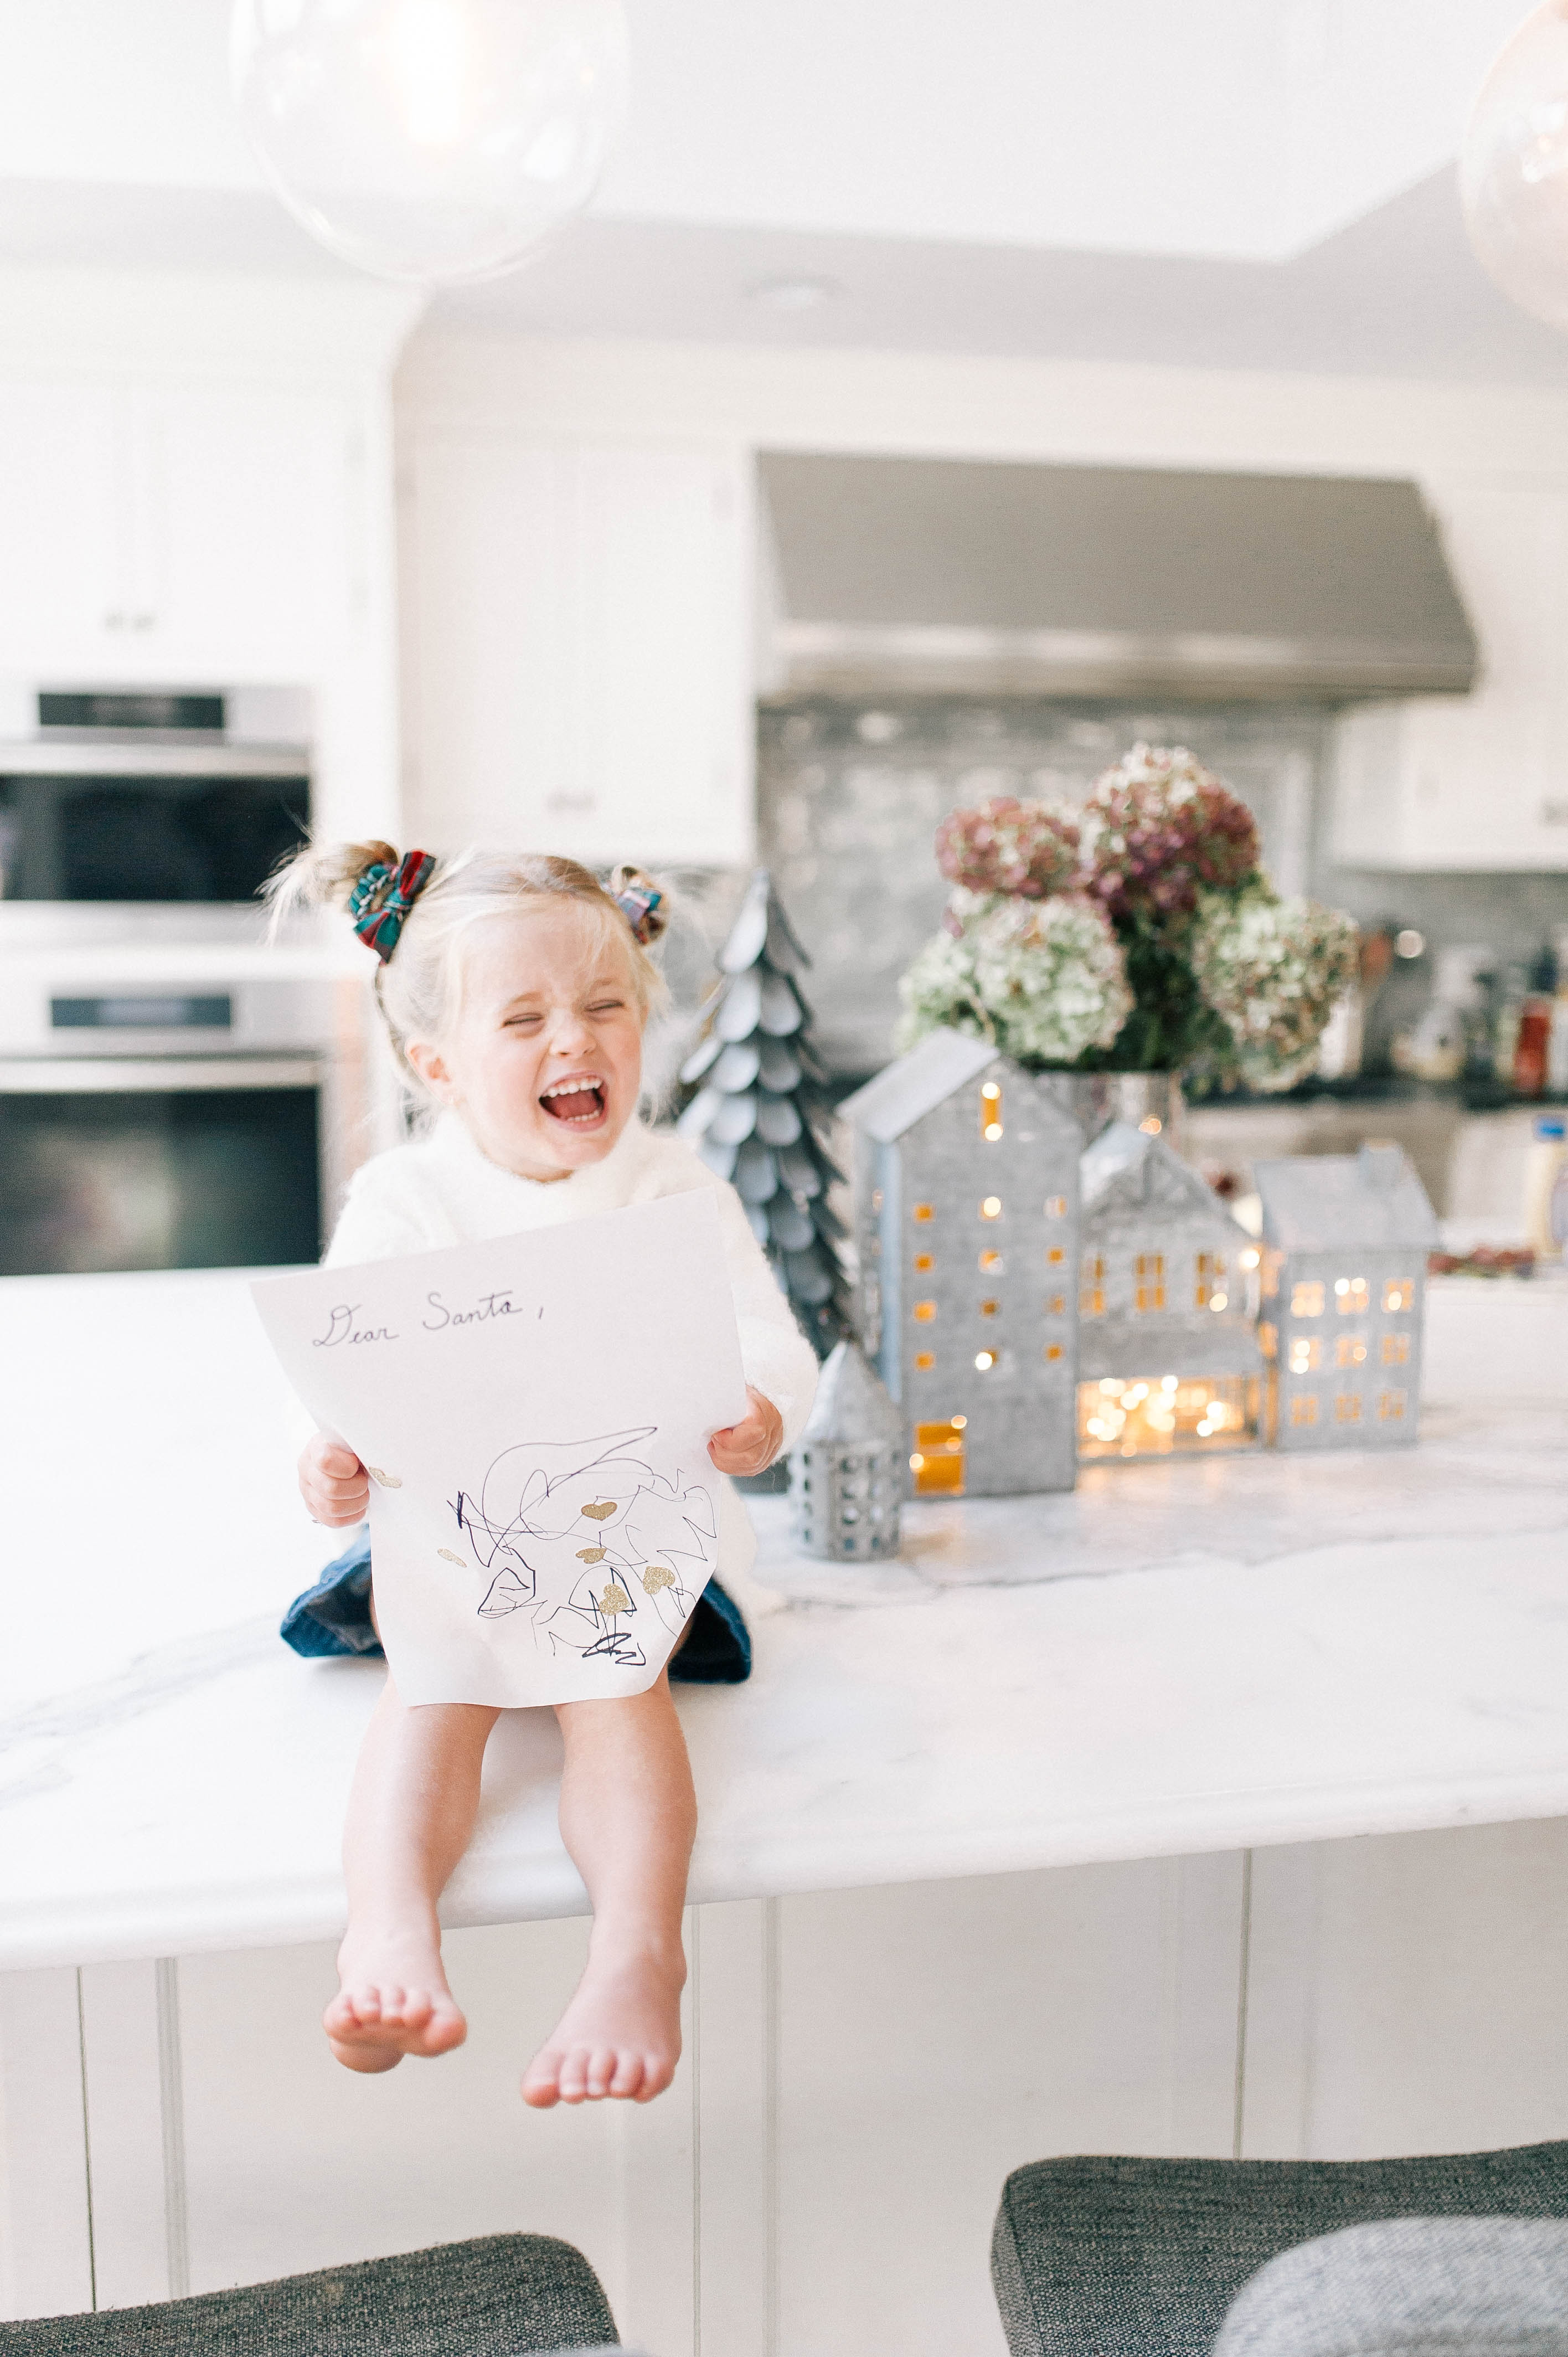 Marlowe Martino shows off her letter to Santa